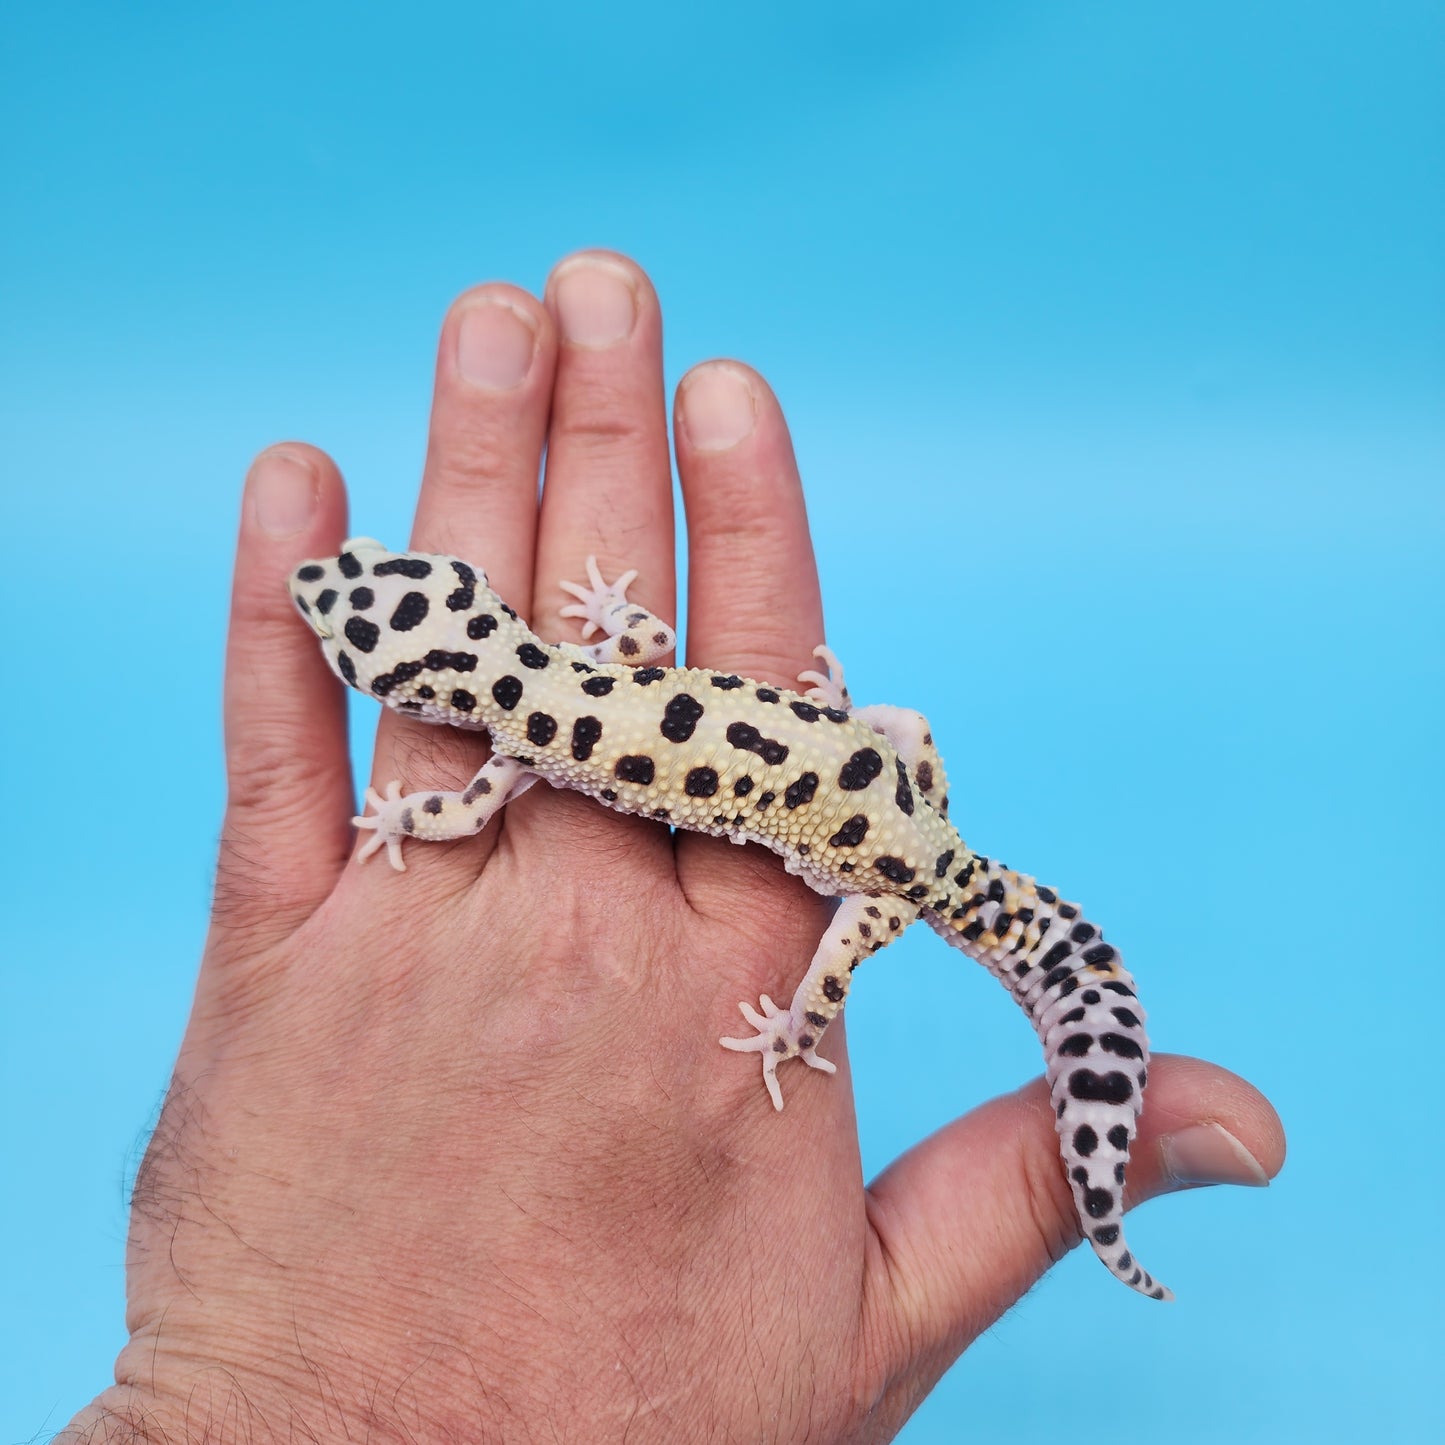 Afghanicus Hyper Xanthic Bold Eclipse White & Yellow (pet crinkle eye)